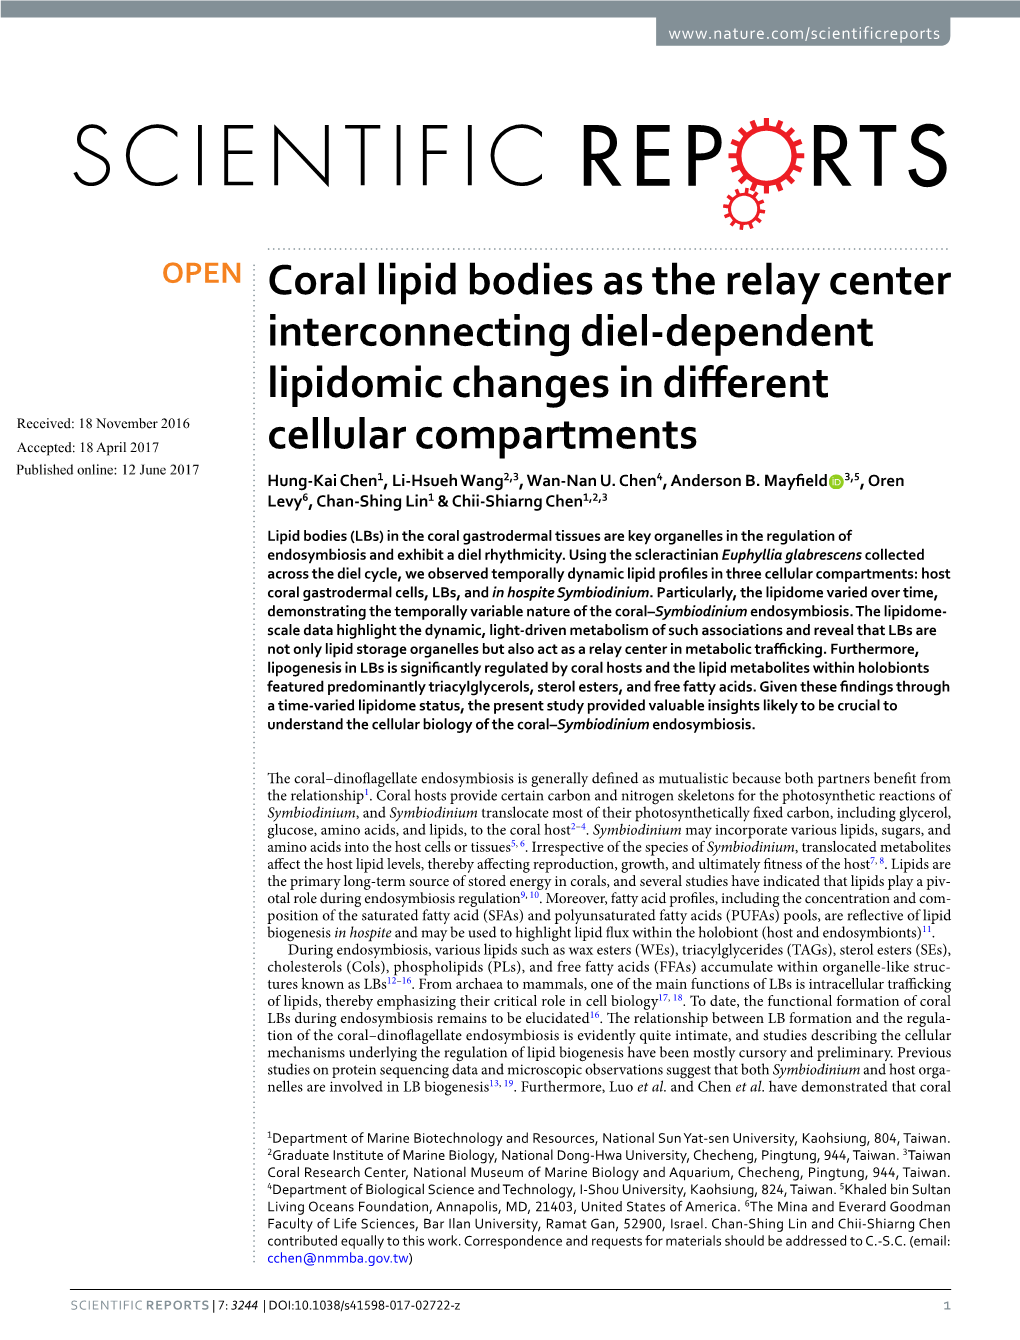 Coral Lipid Bodies As the Relay Center Interconnecting Diel-Dependent